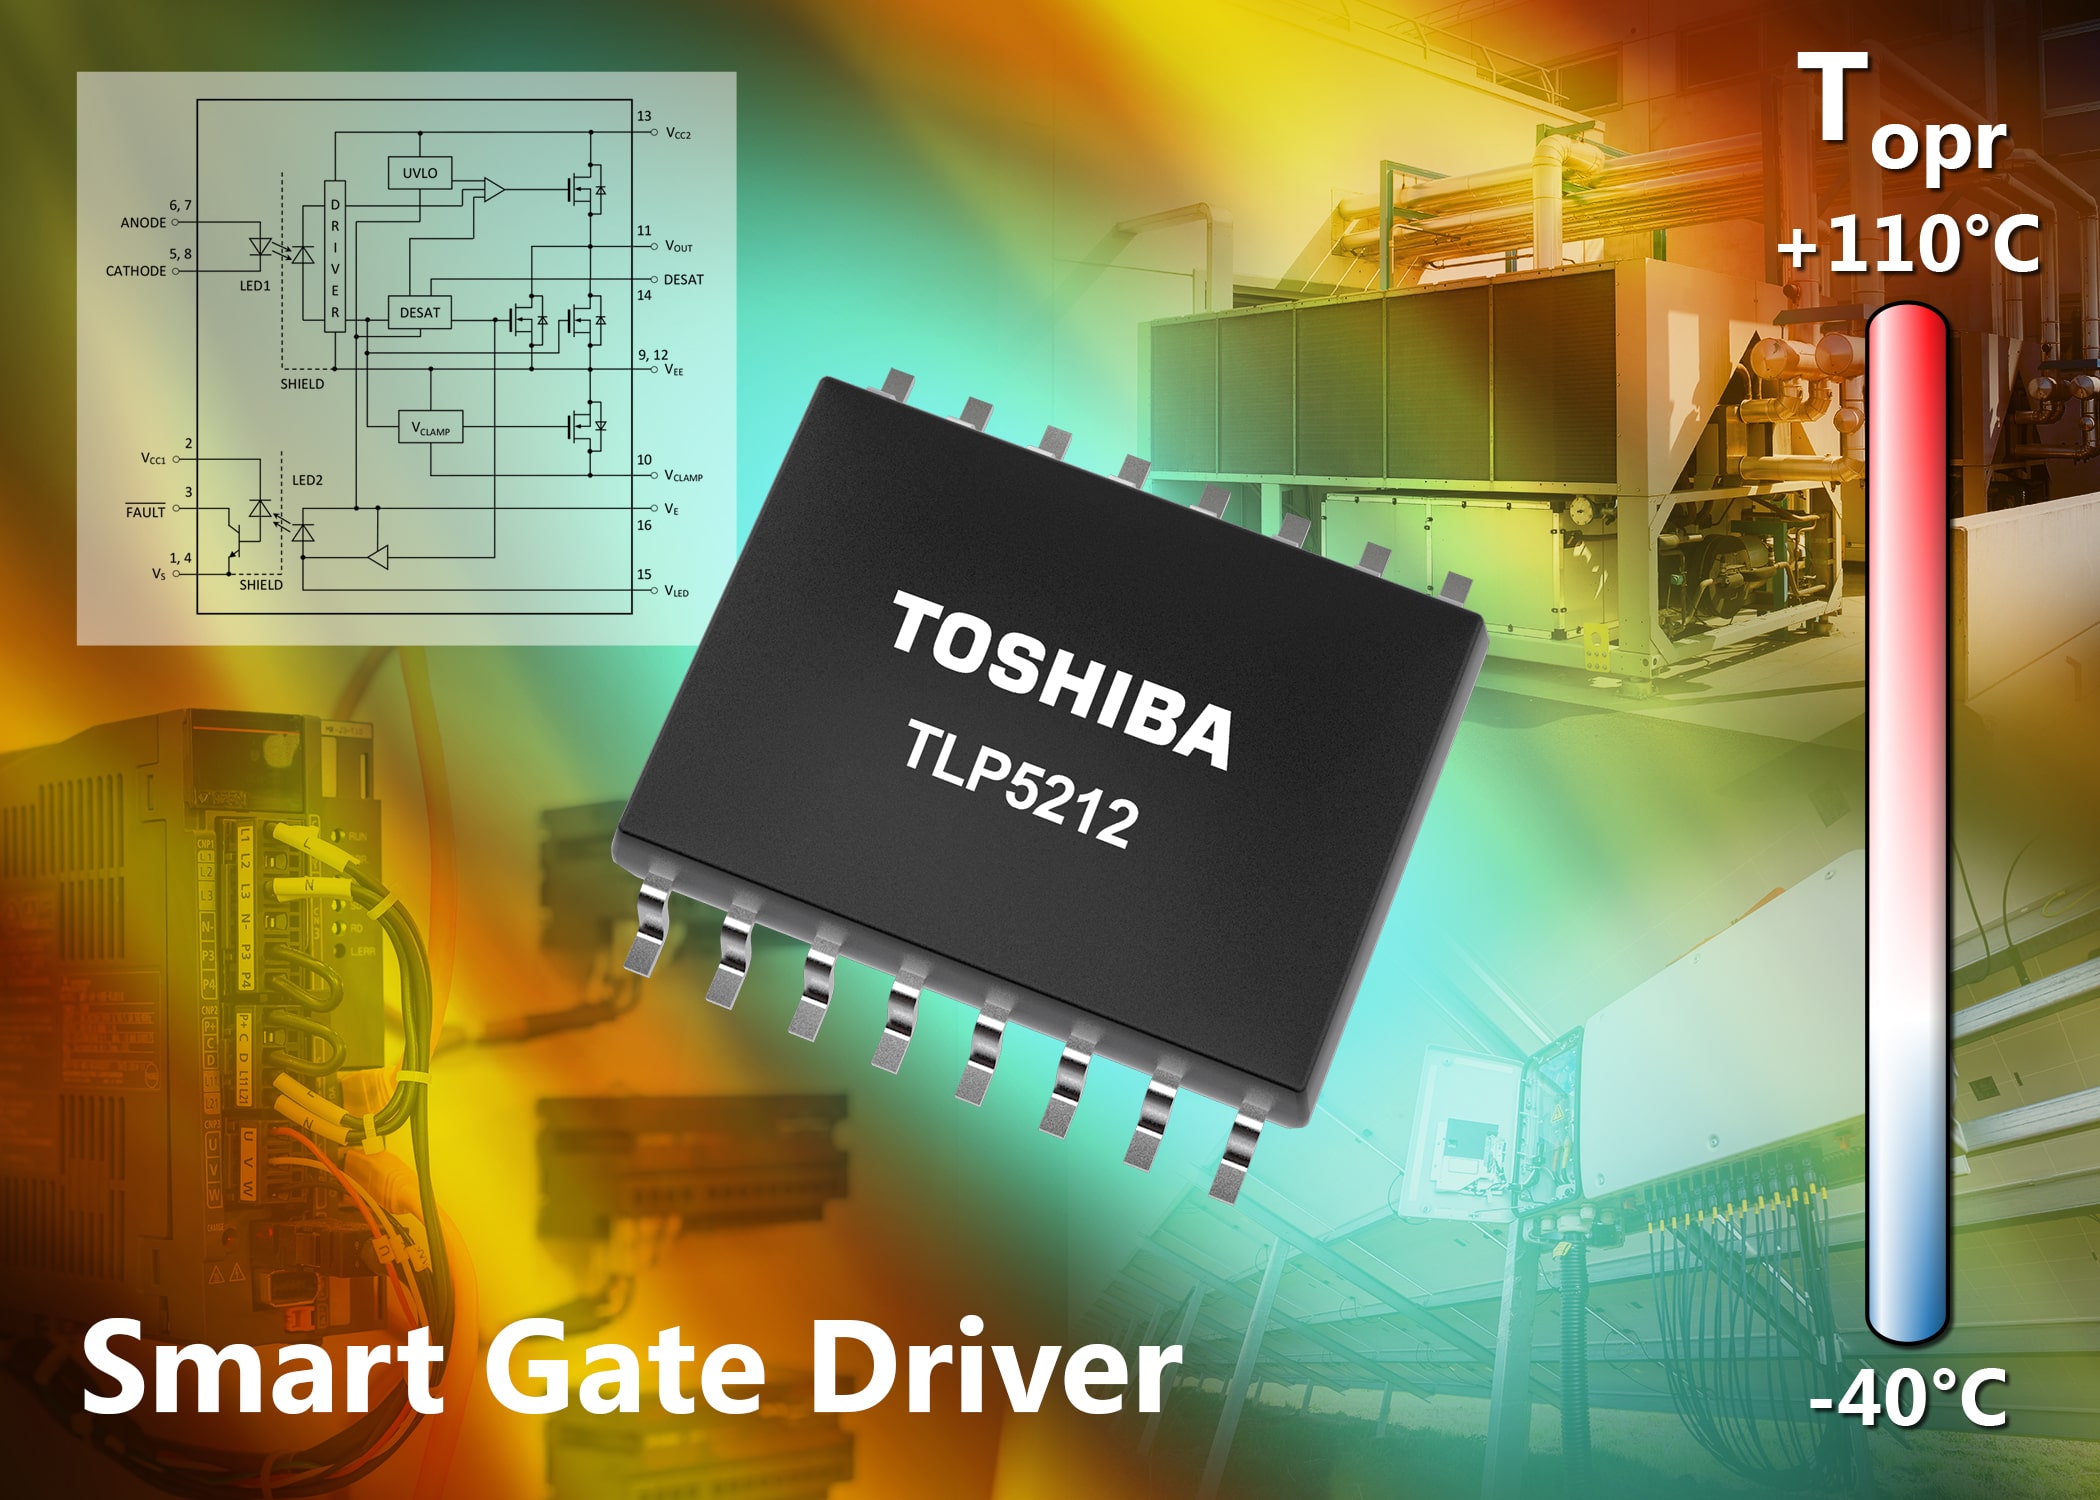 Toshiba releases 2.5A output smart gate driver photocoupler for IGBT and MOSFET control and power protection in industrial applications